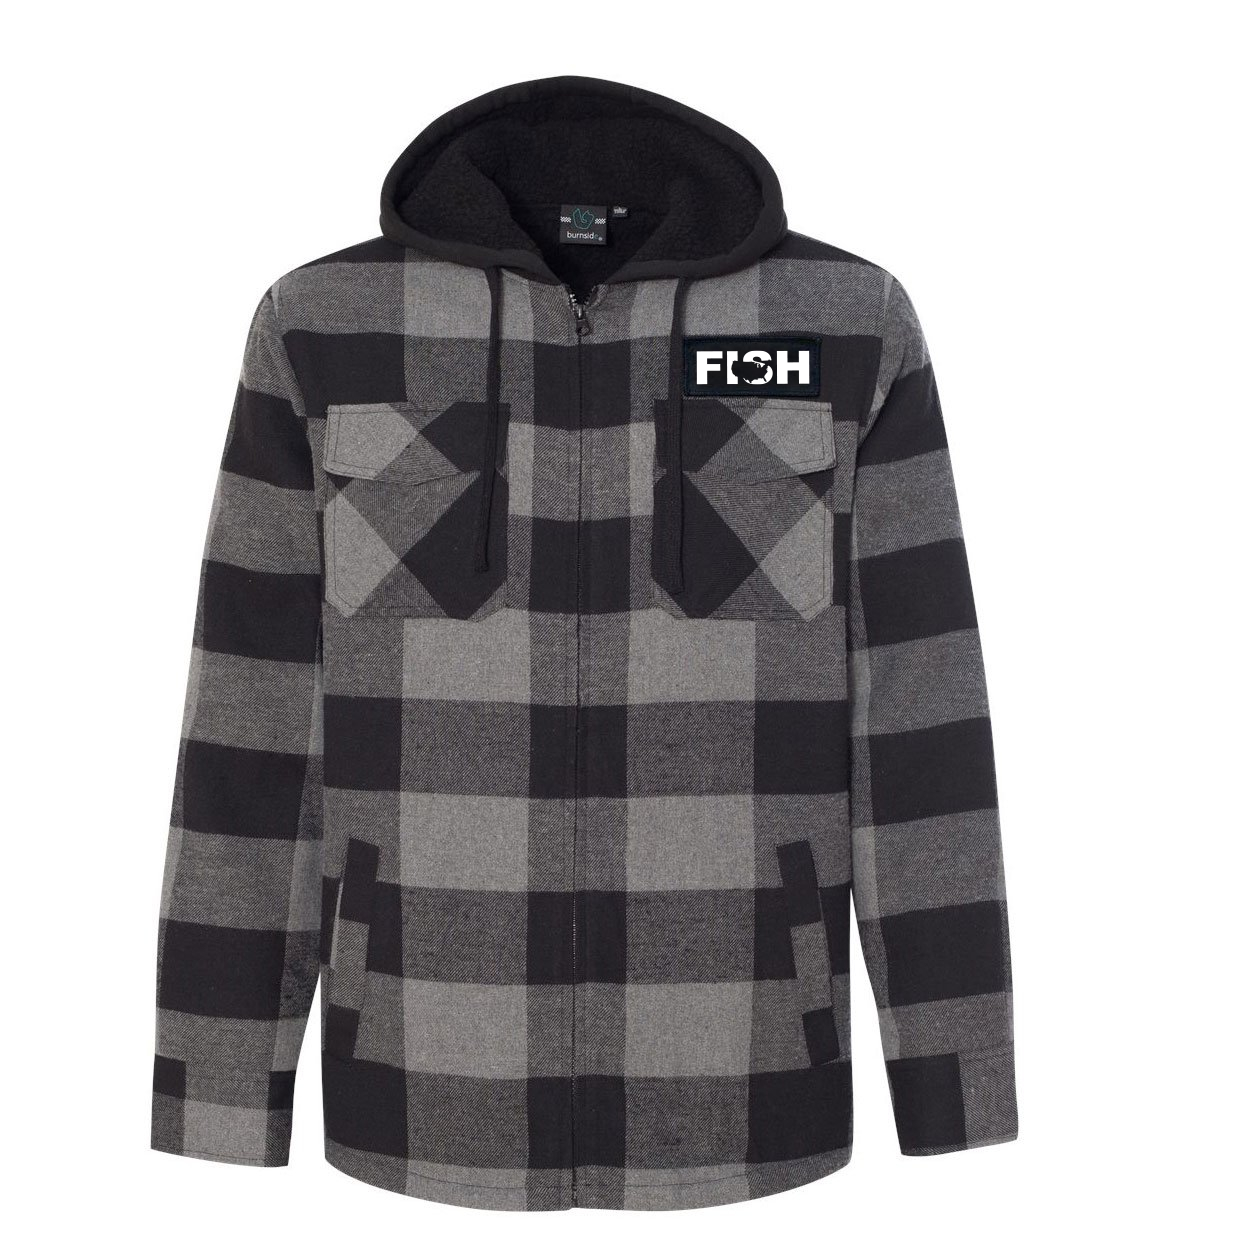 Fish United States Classic Unisex Full Zip Woven Patch Hooded Flannel Jacket Black/Gray (White Logo)